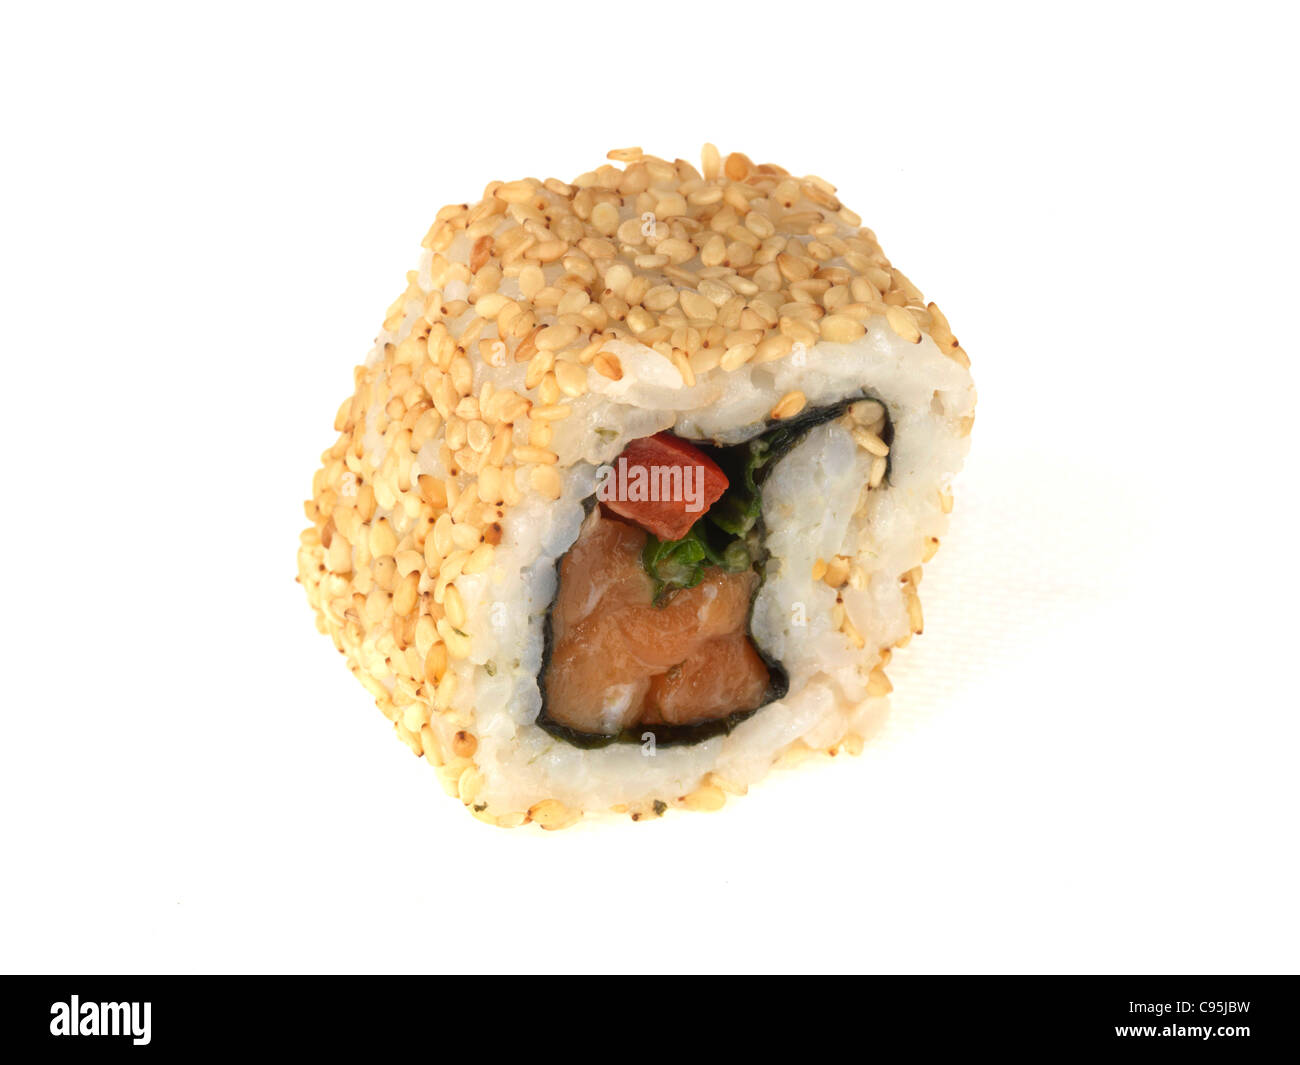 Freshly Prepared Salmon Sushi With Sticky Rice And Sesame Seeds Against A White Background With A Clipping Path And No People Stock Photo